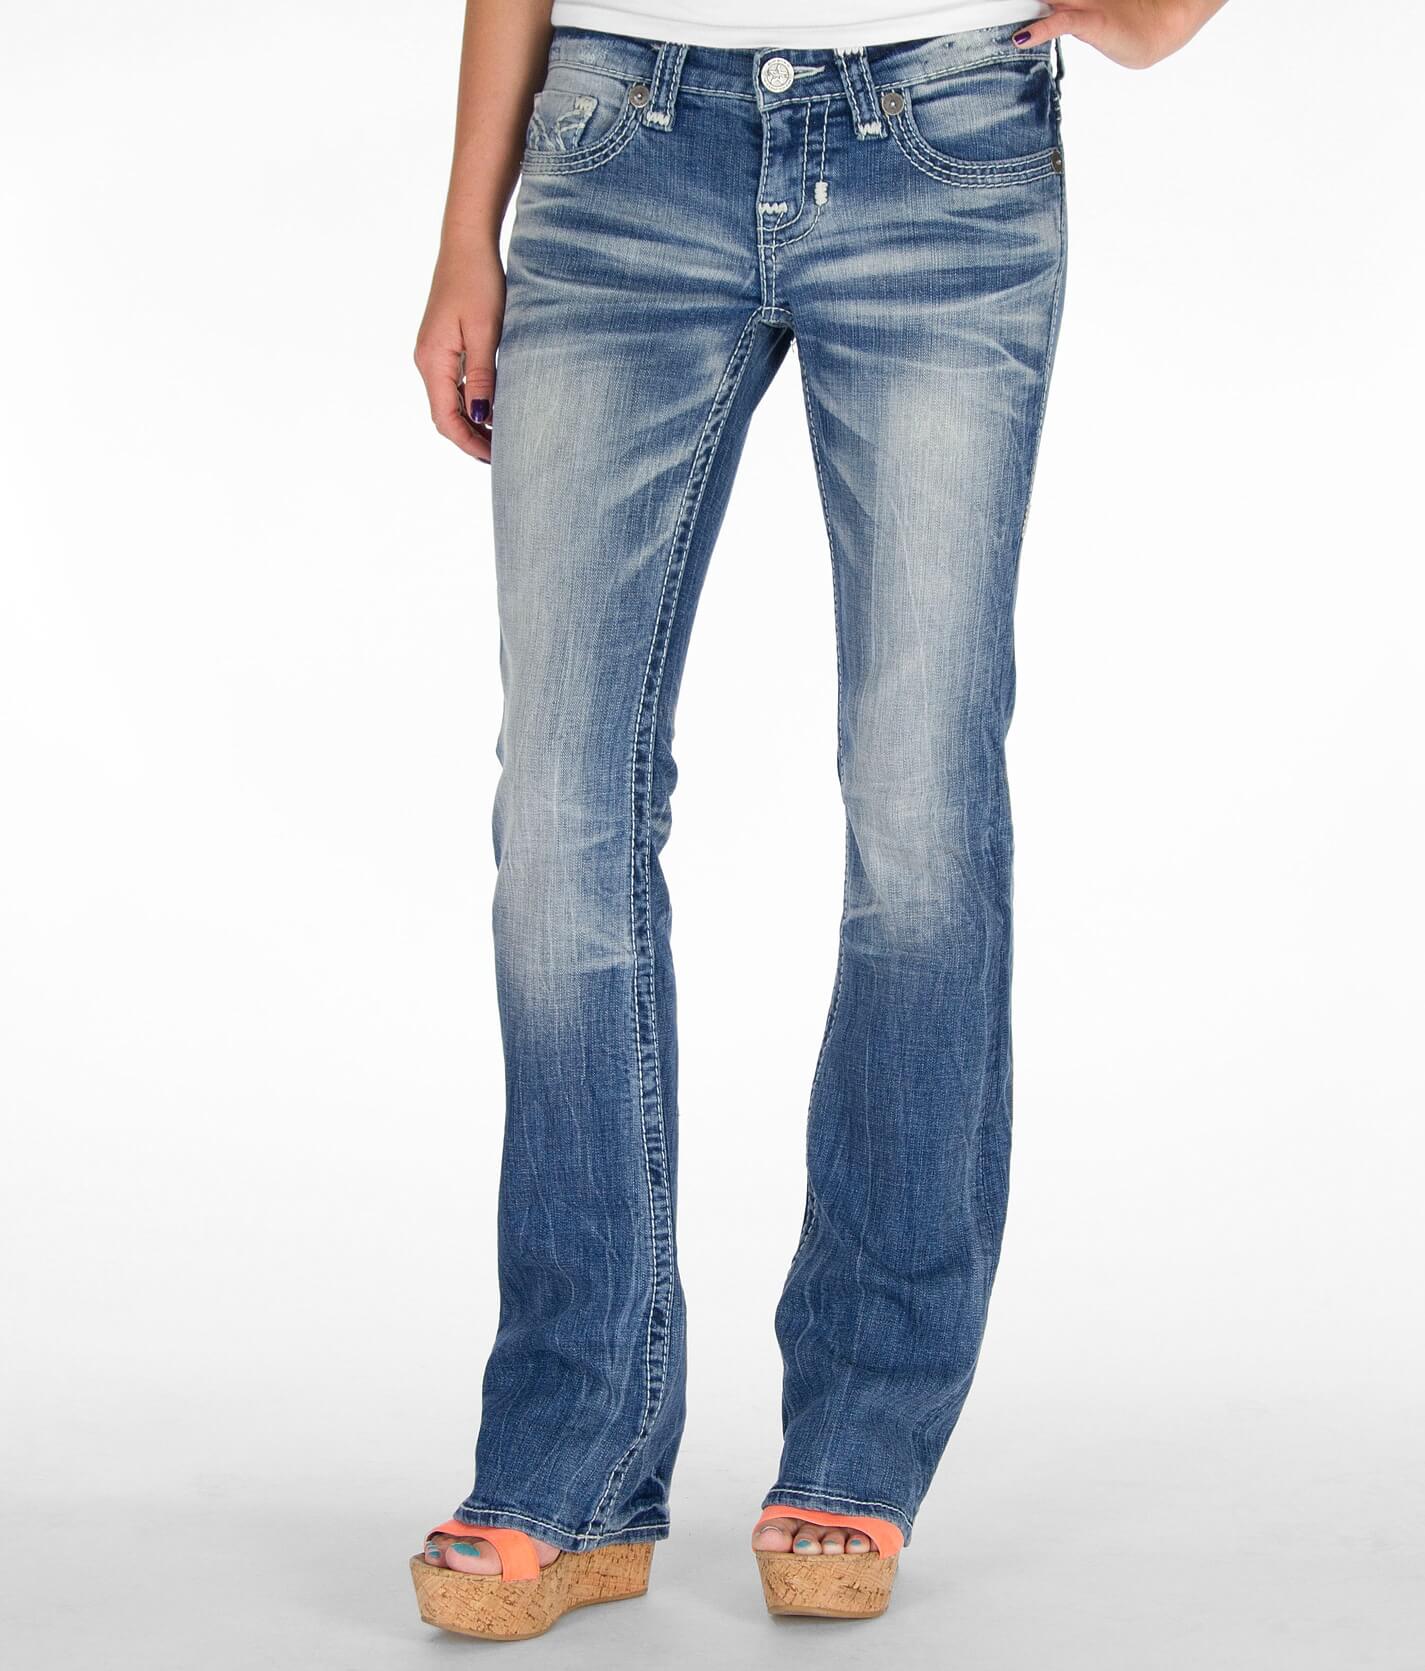 women's jeans with rhinestones on back pockets